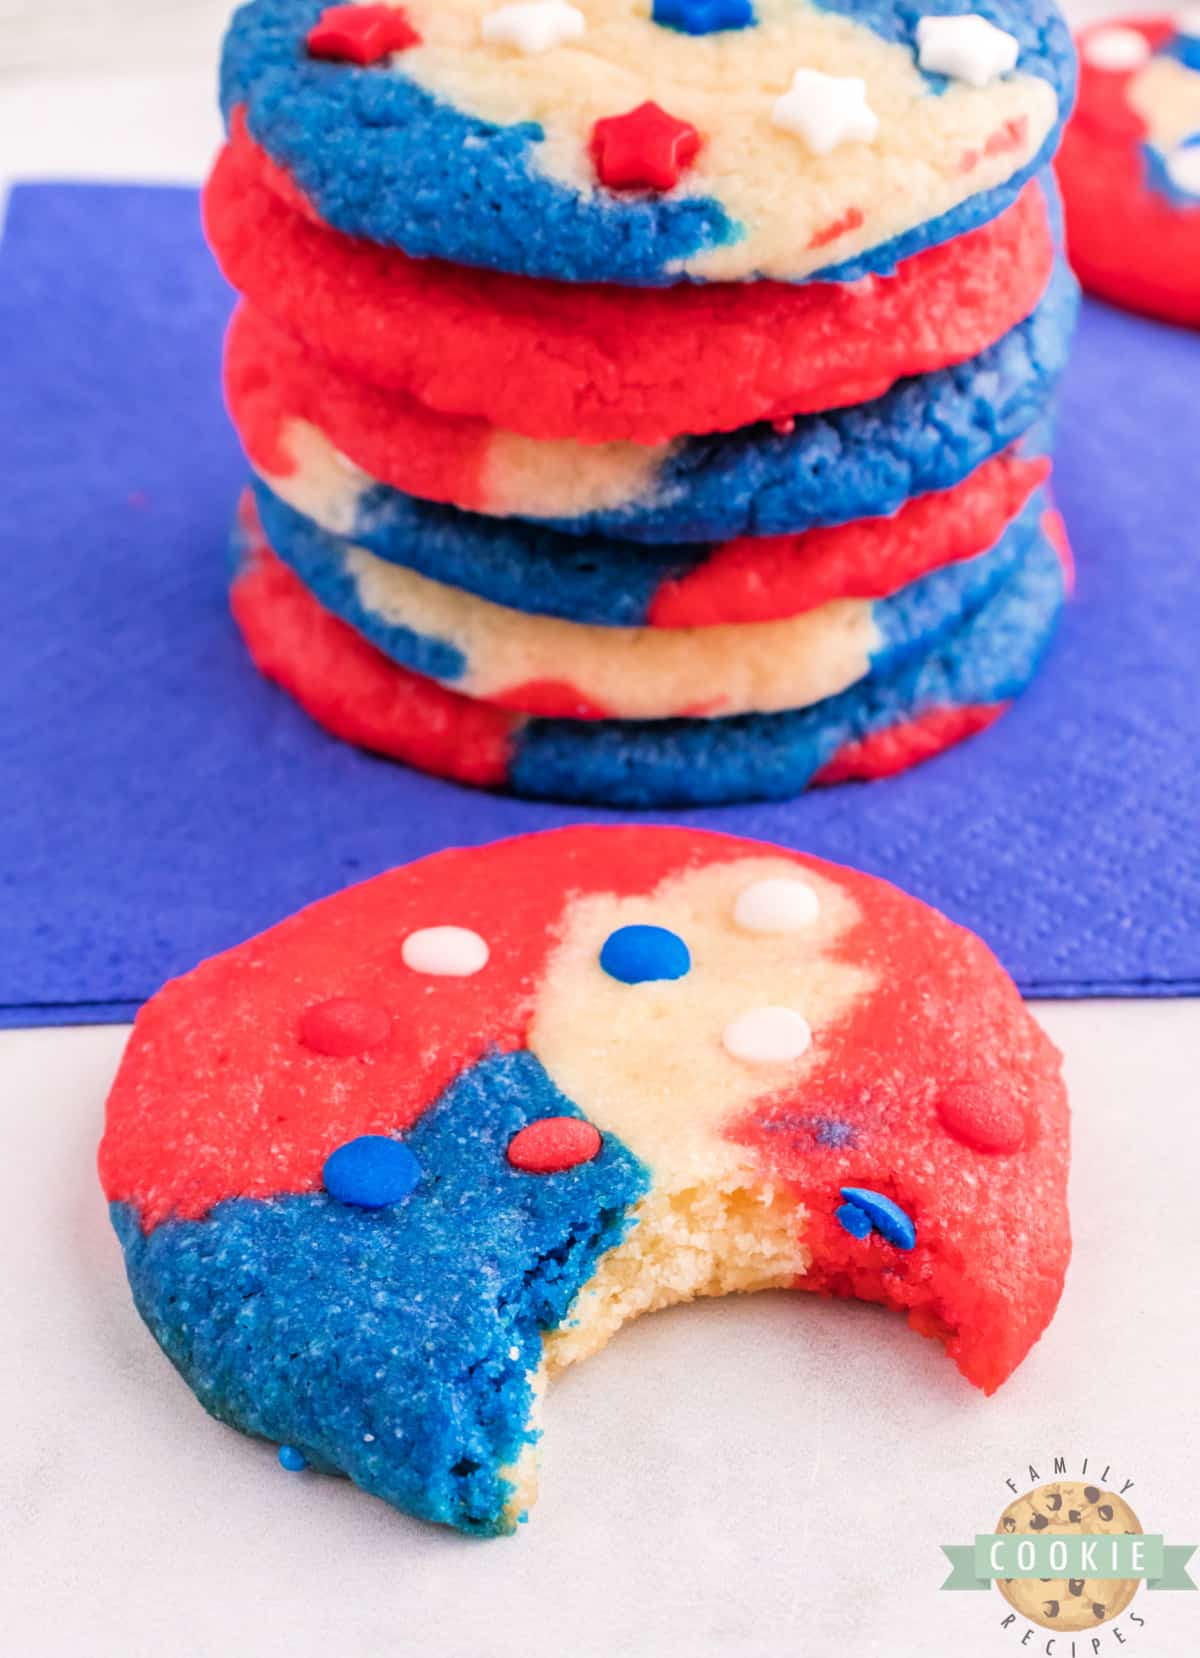 Red, white and blue sugar cookies